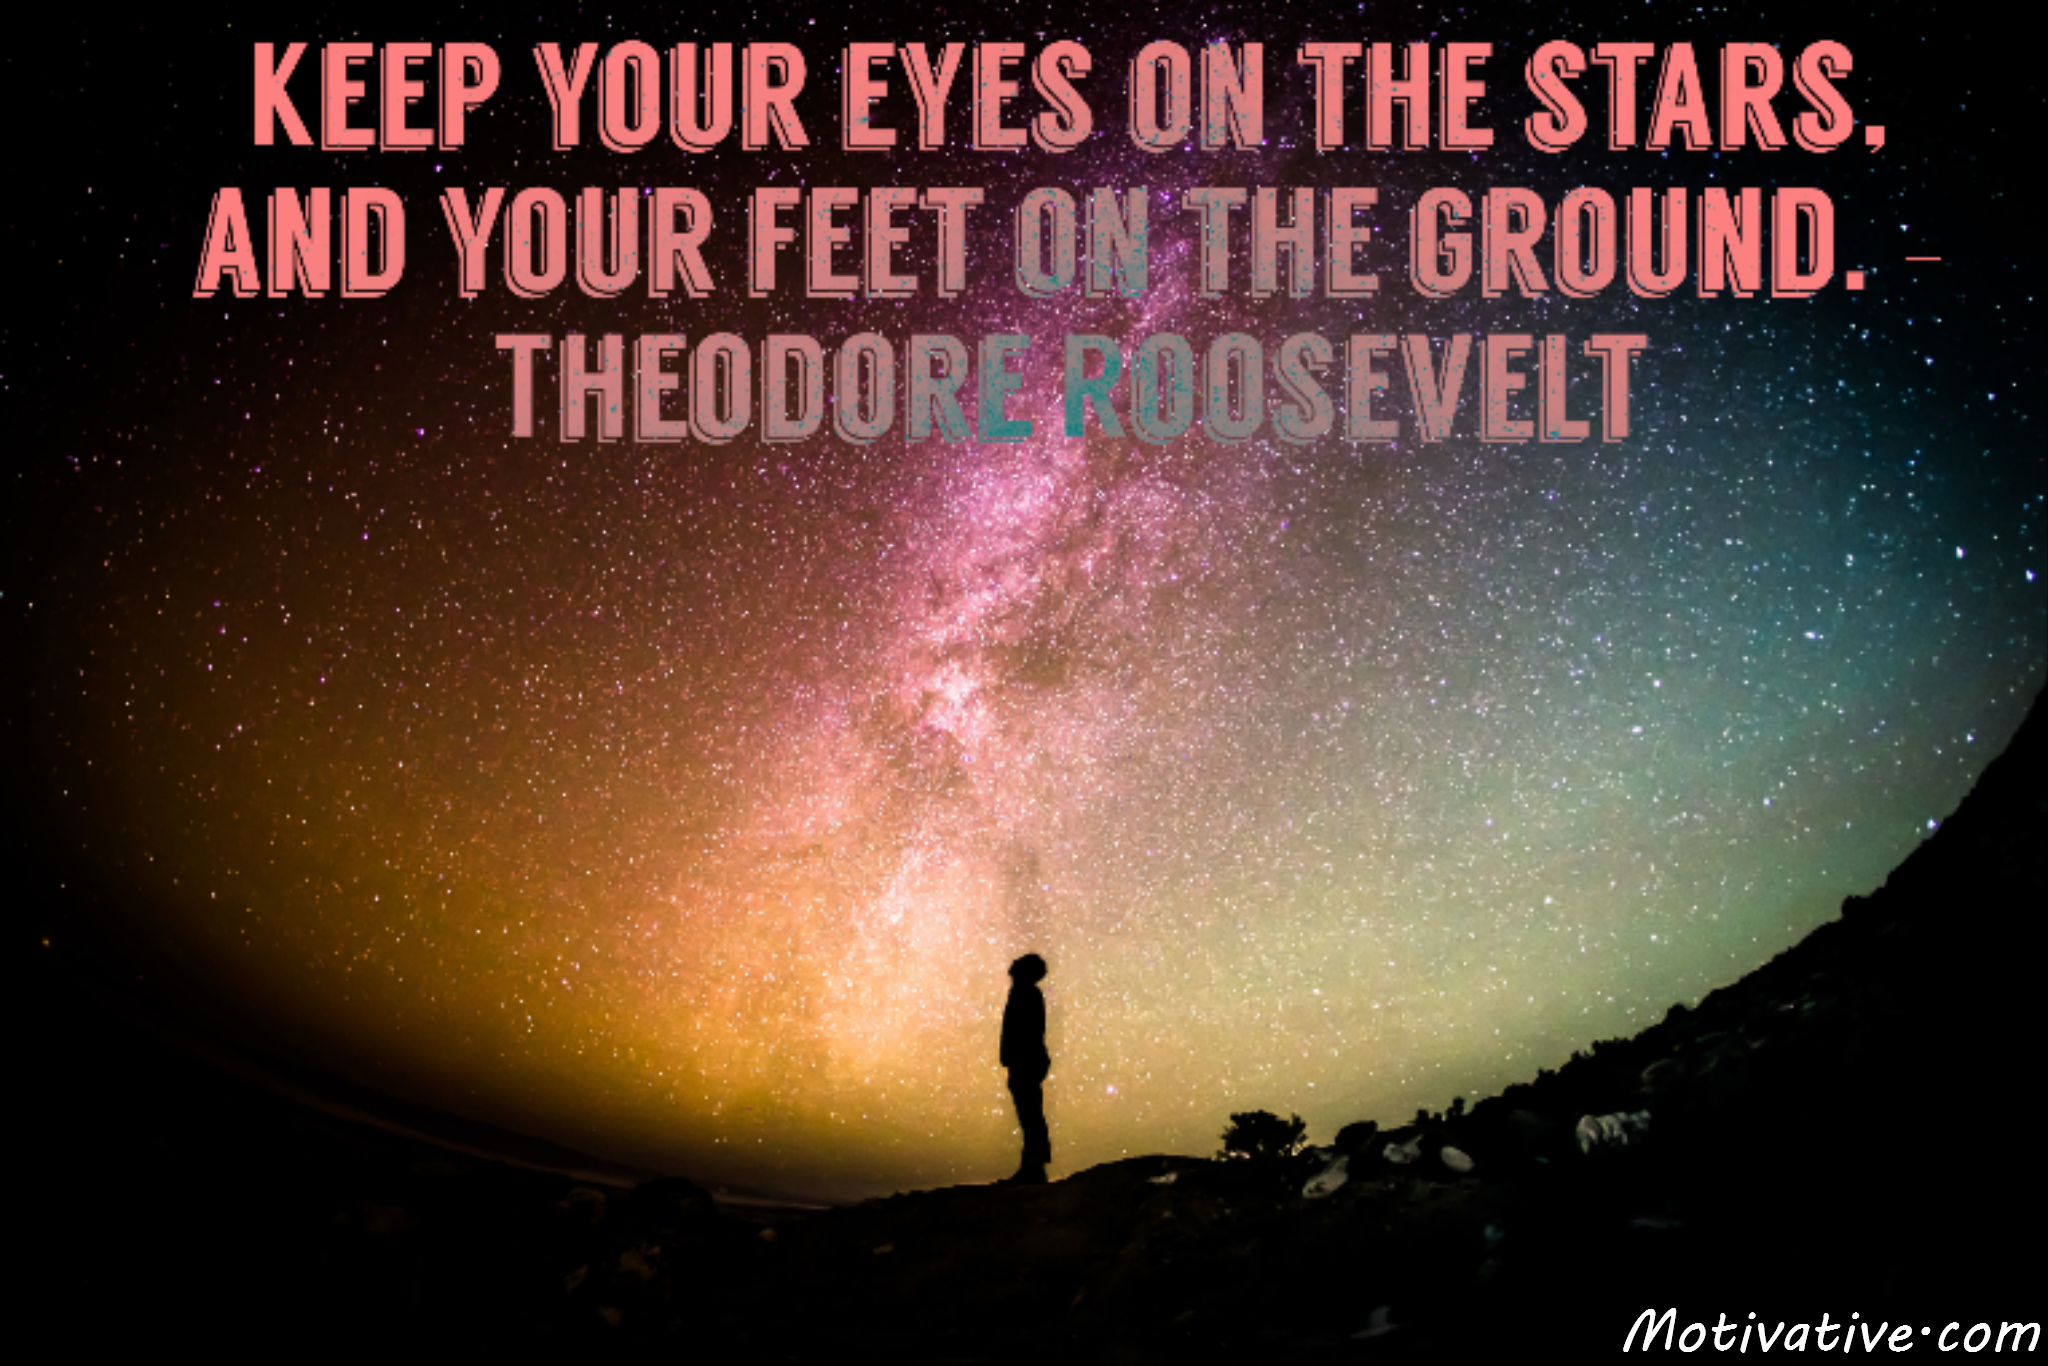 Keep your eyes on the stars, and your feet on the ground. – Theodore Roosevelt